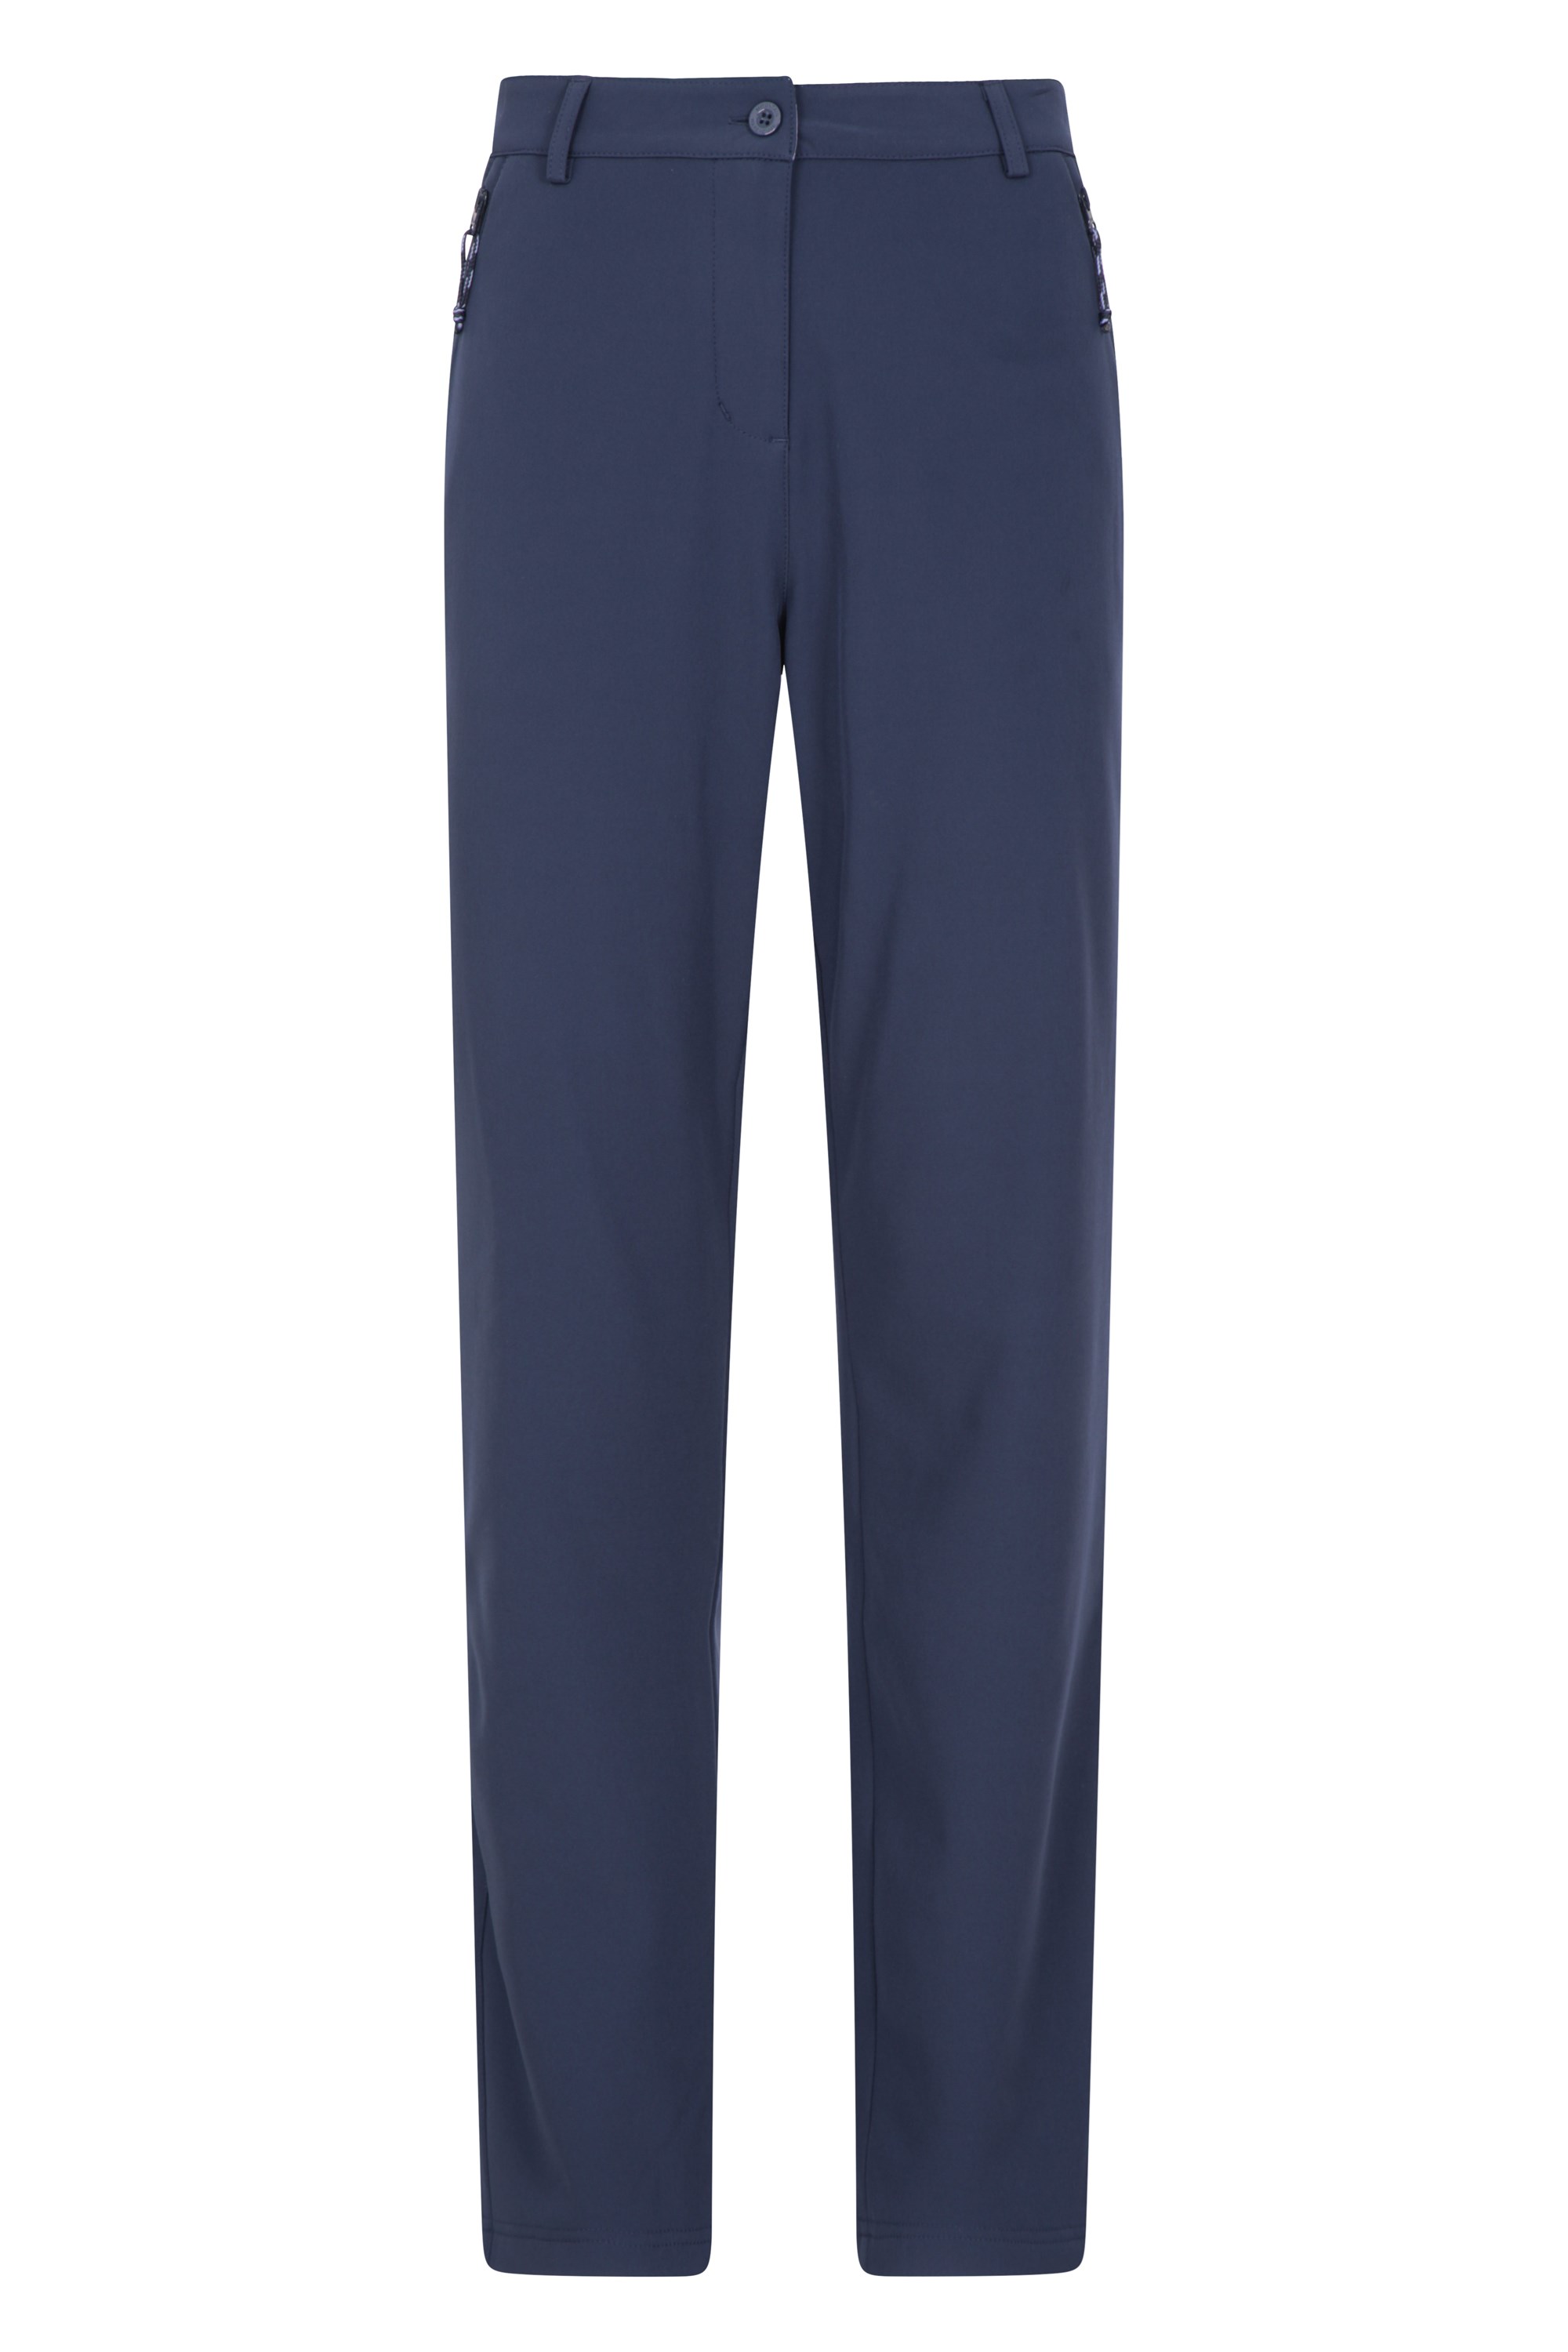 Vermont Womens Softshell Trousers - Short Length - Navy